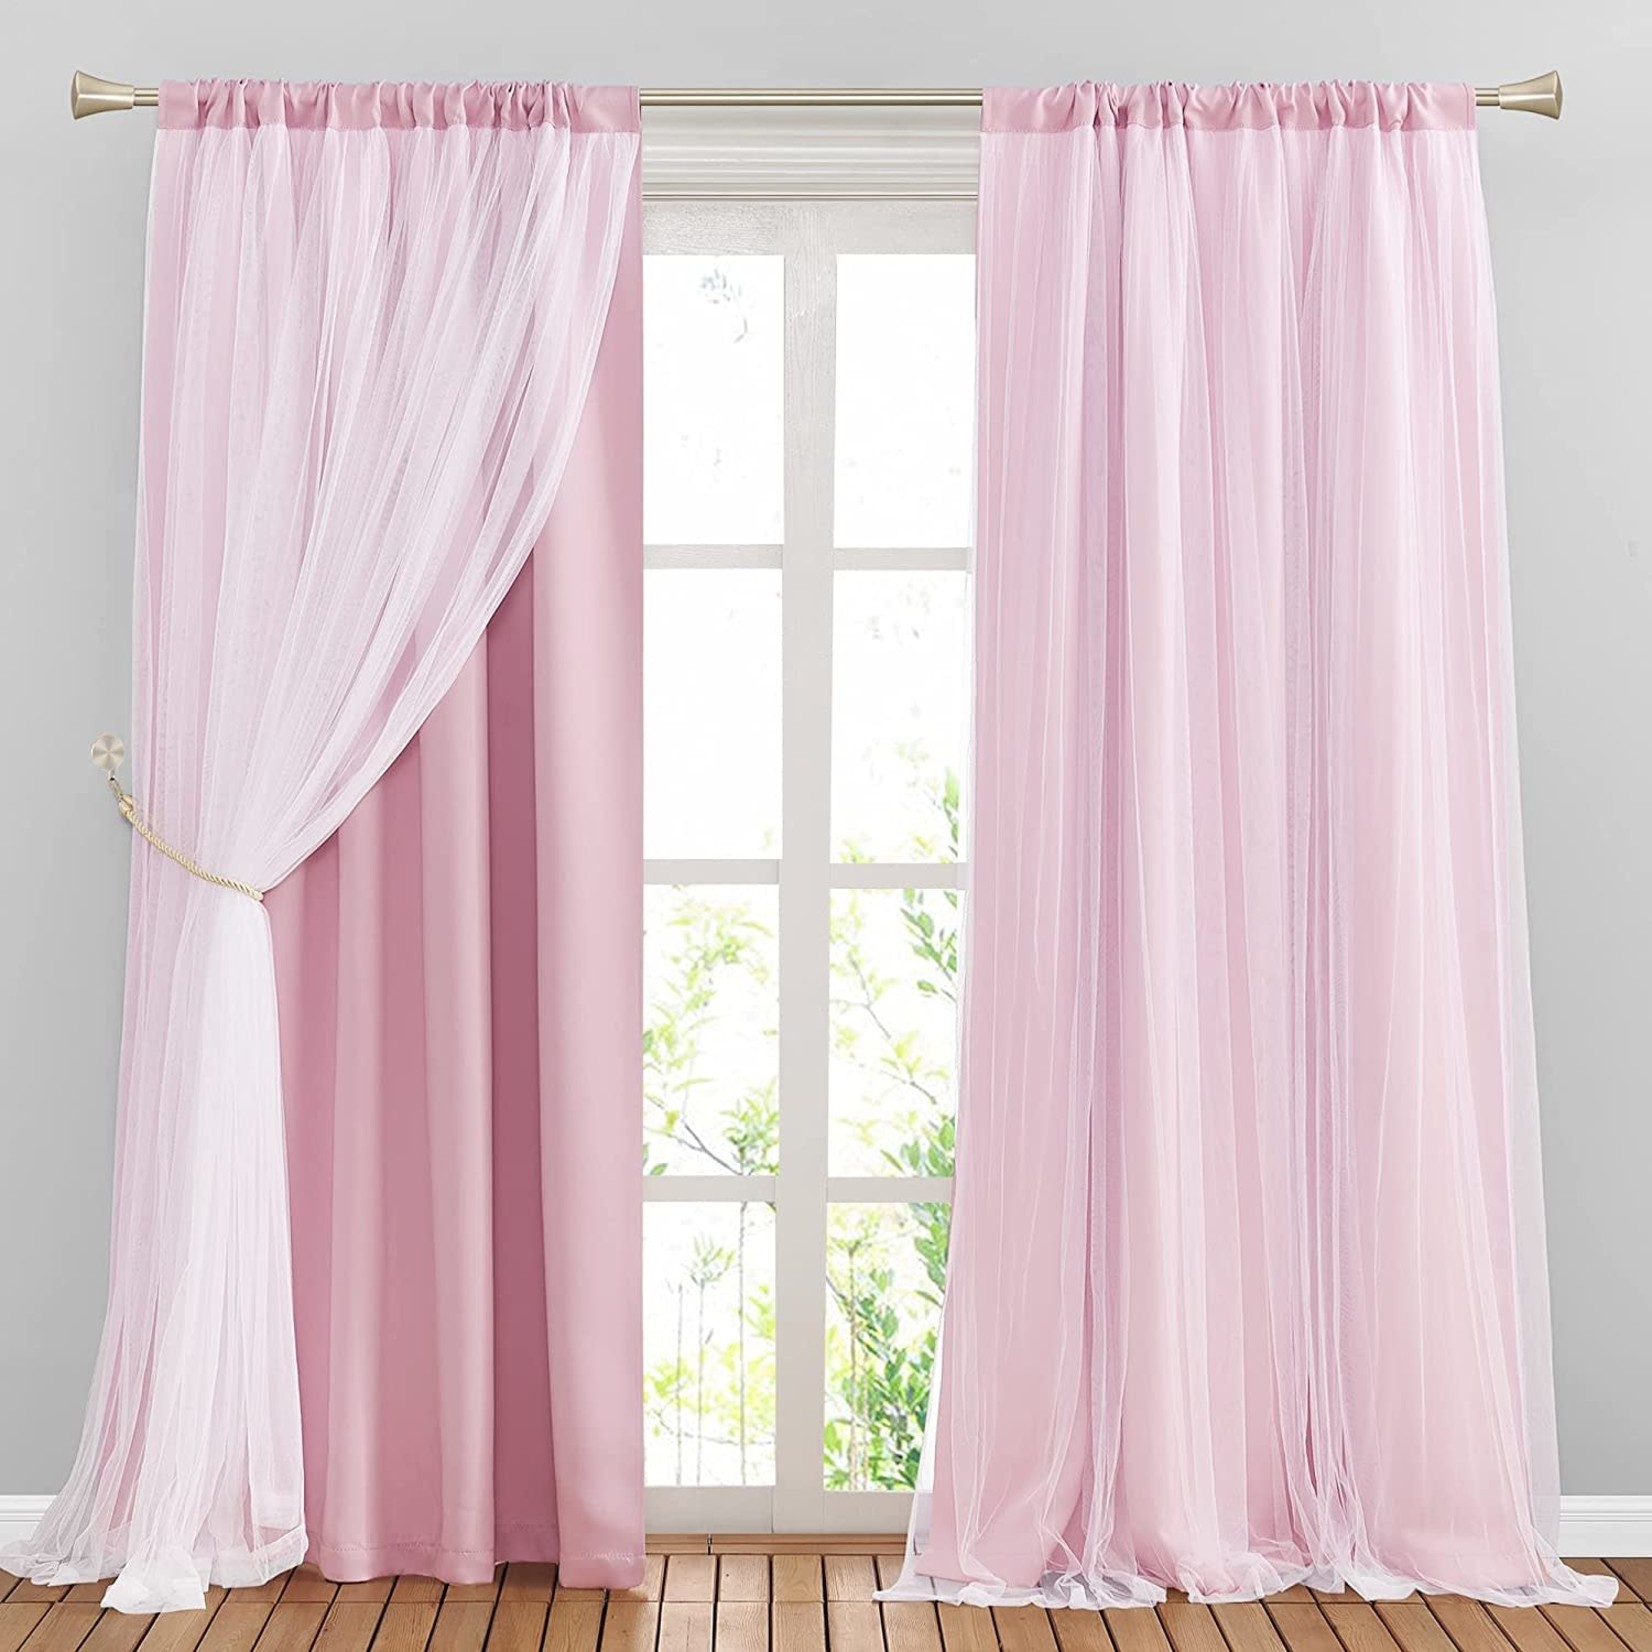 Pony Dance Double-Layered Curtains 84 x 52 - Pink - 2 Pc Set